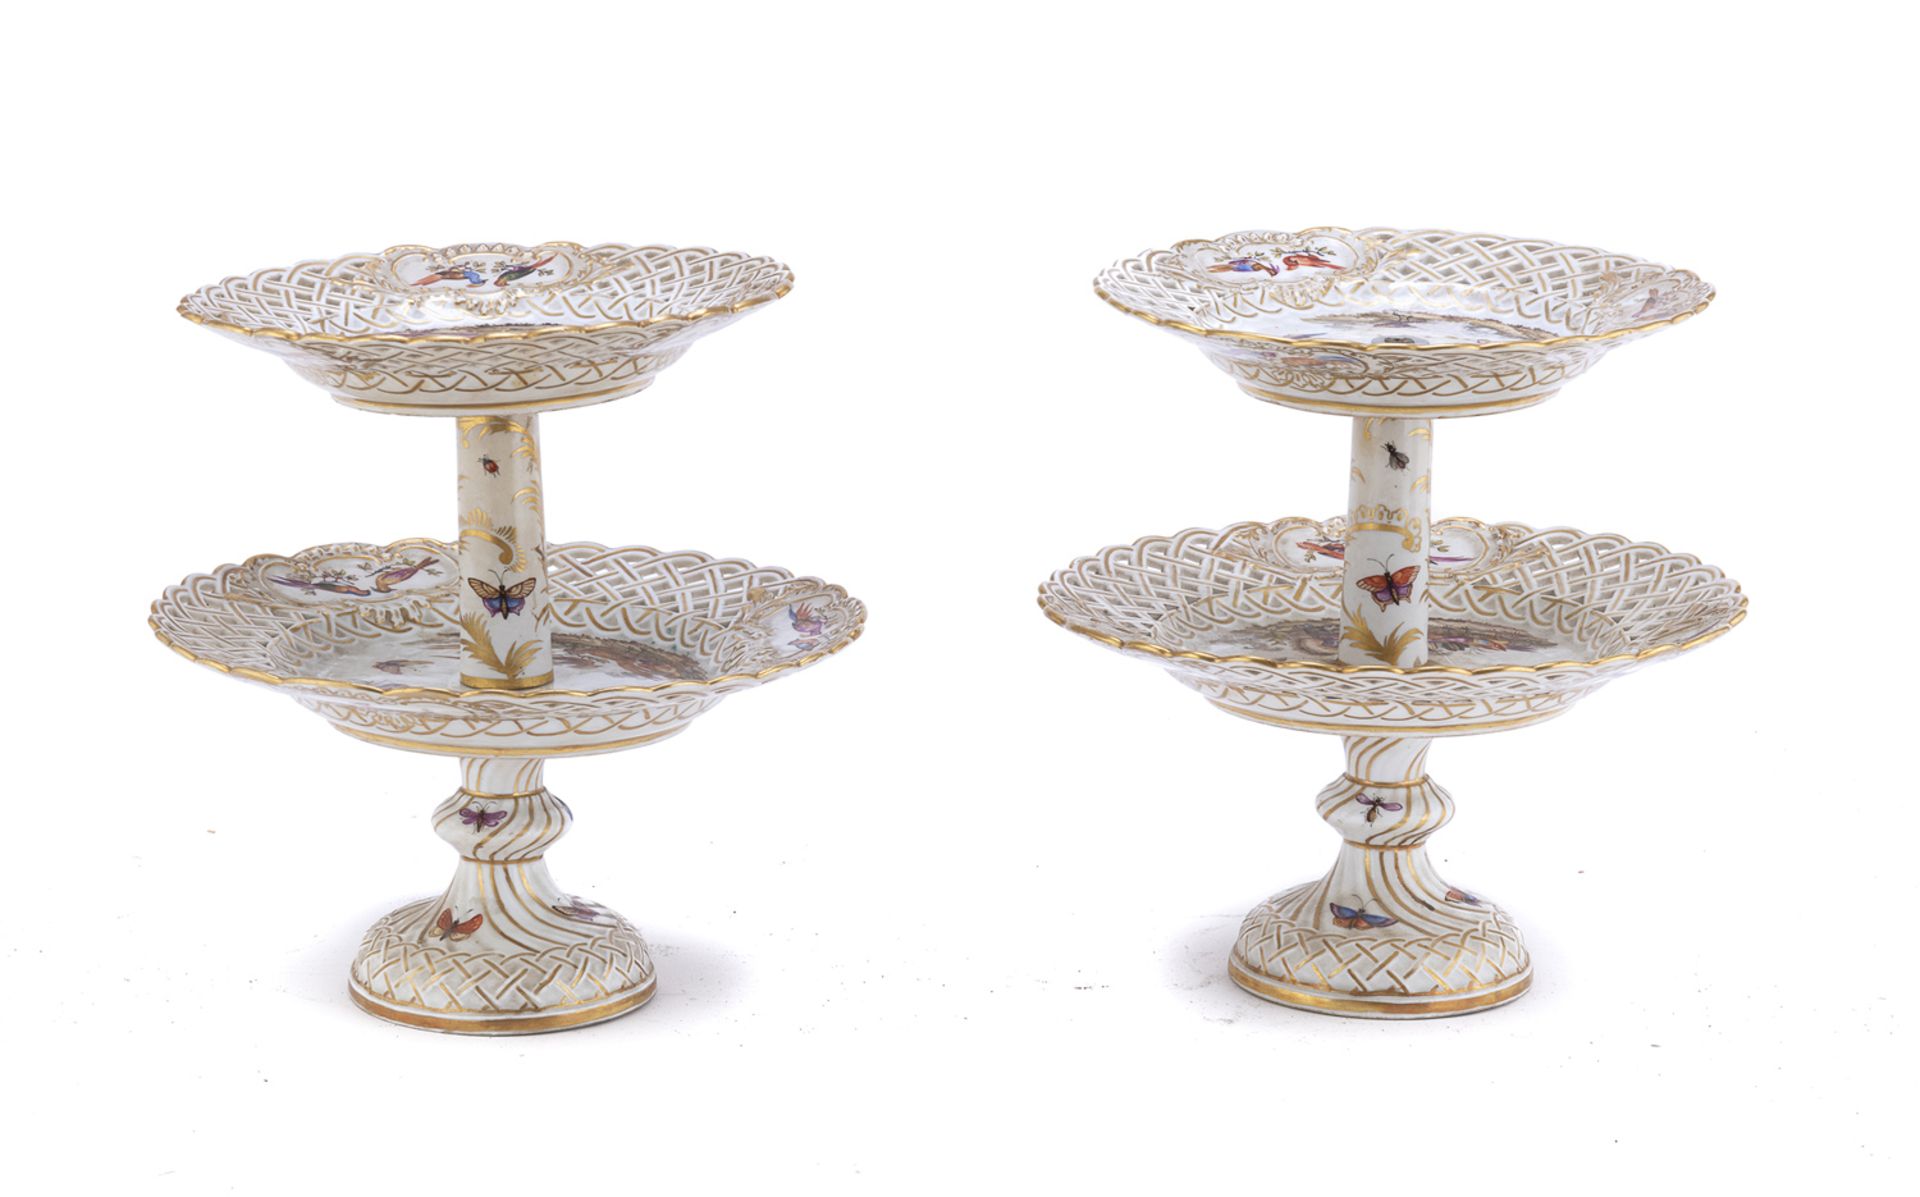 TWO PORCELAIN STANDS AUGUSTUS REX EARLY 19th CENTURY